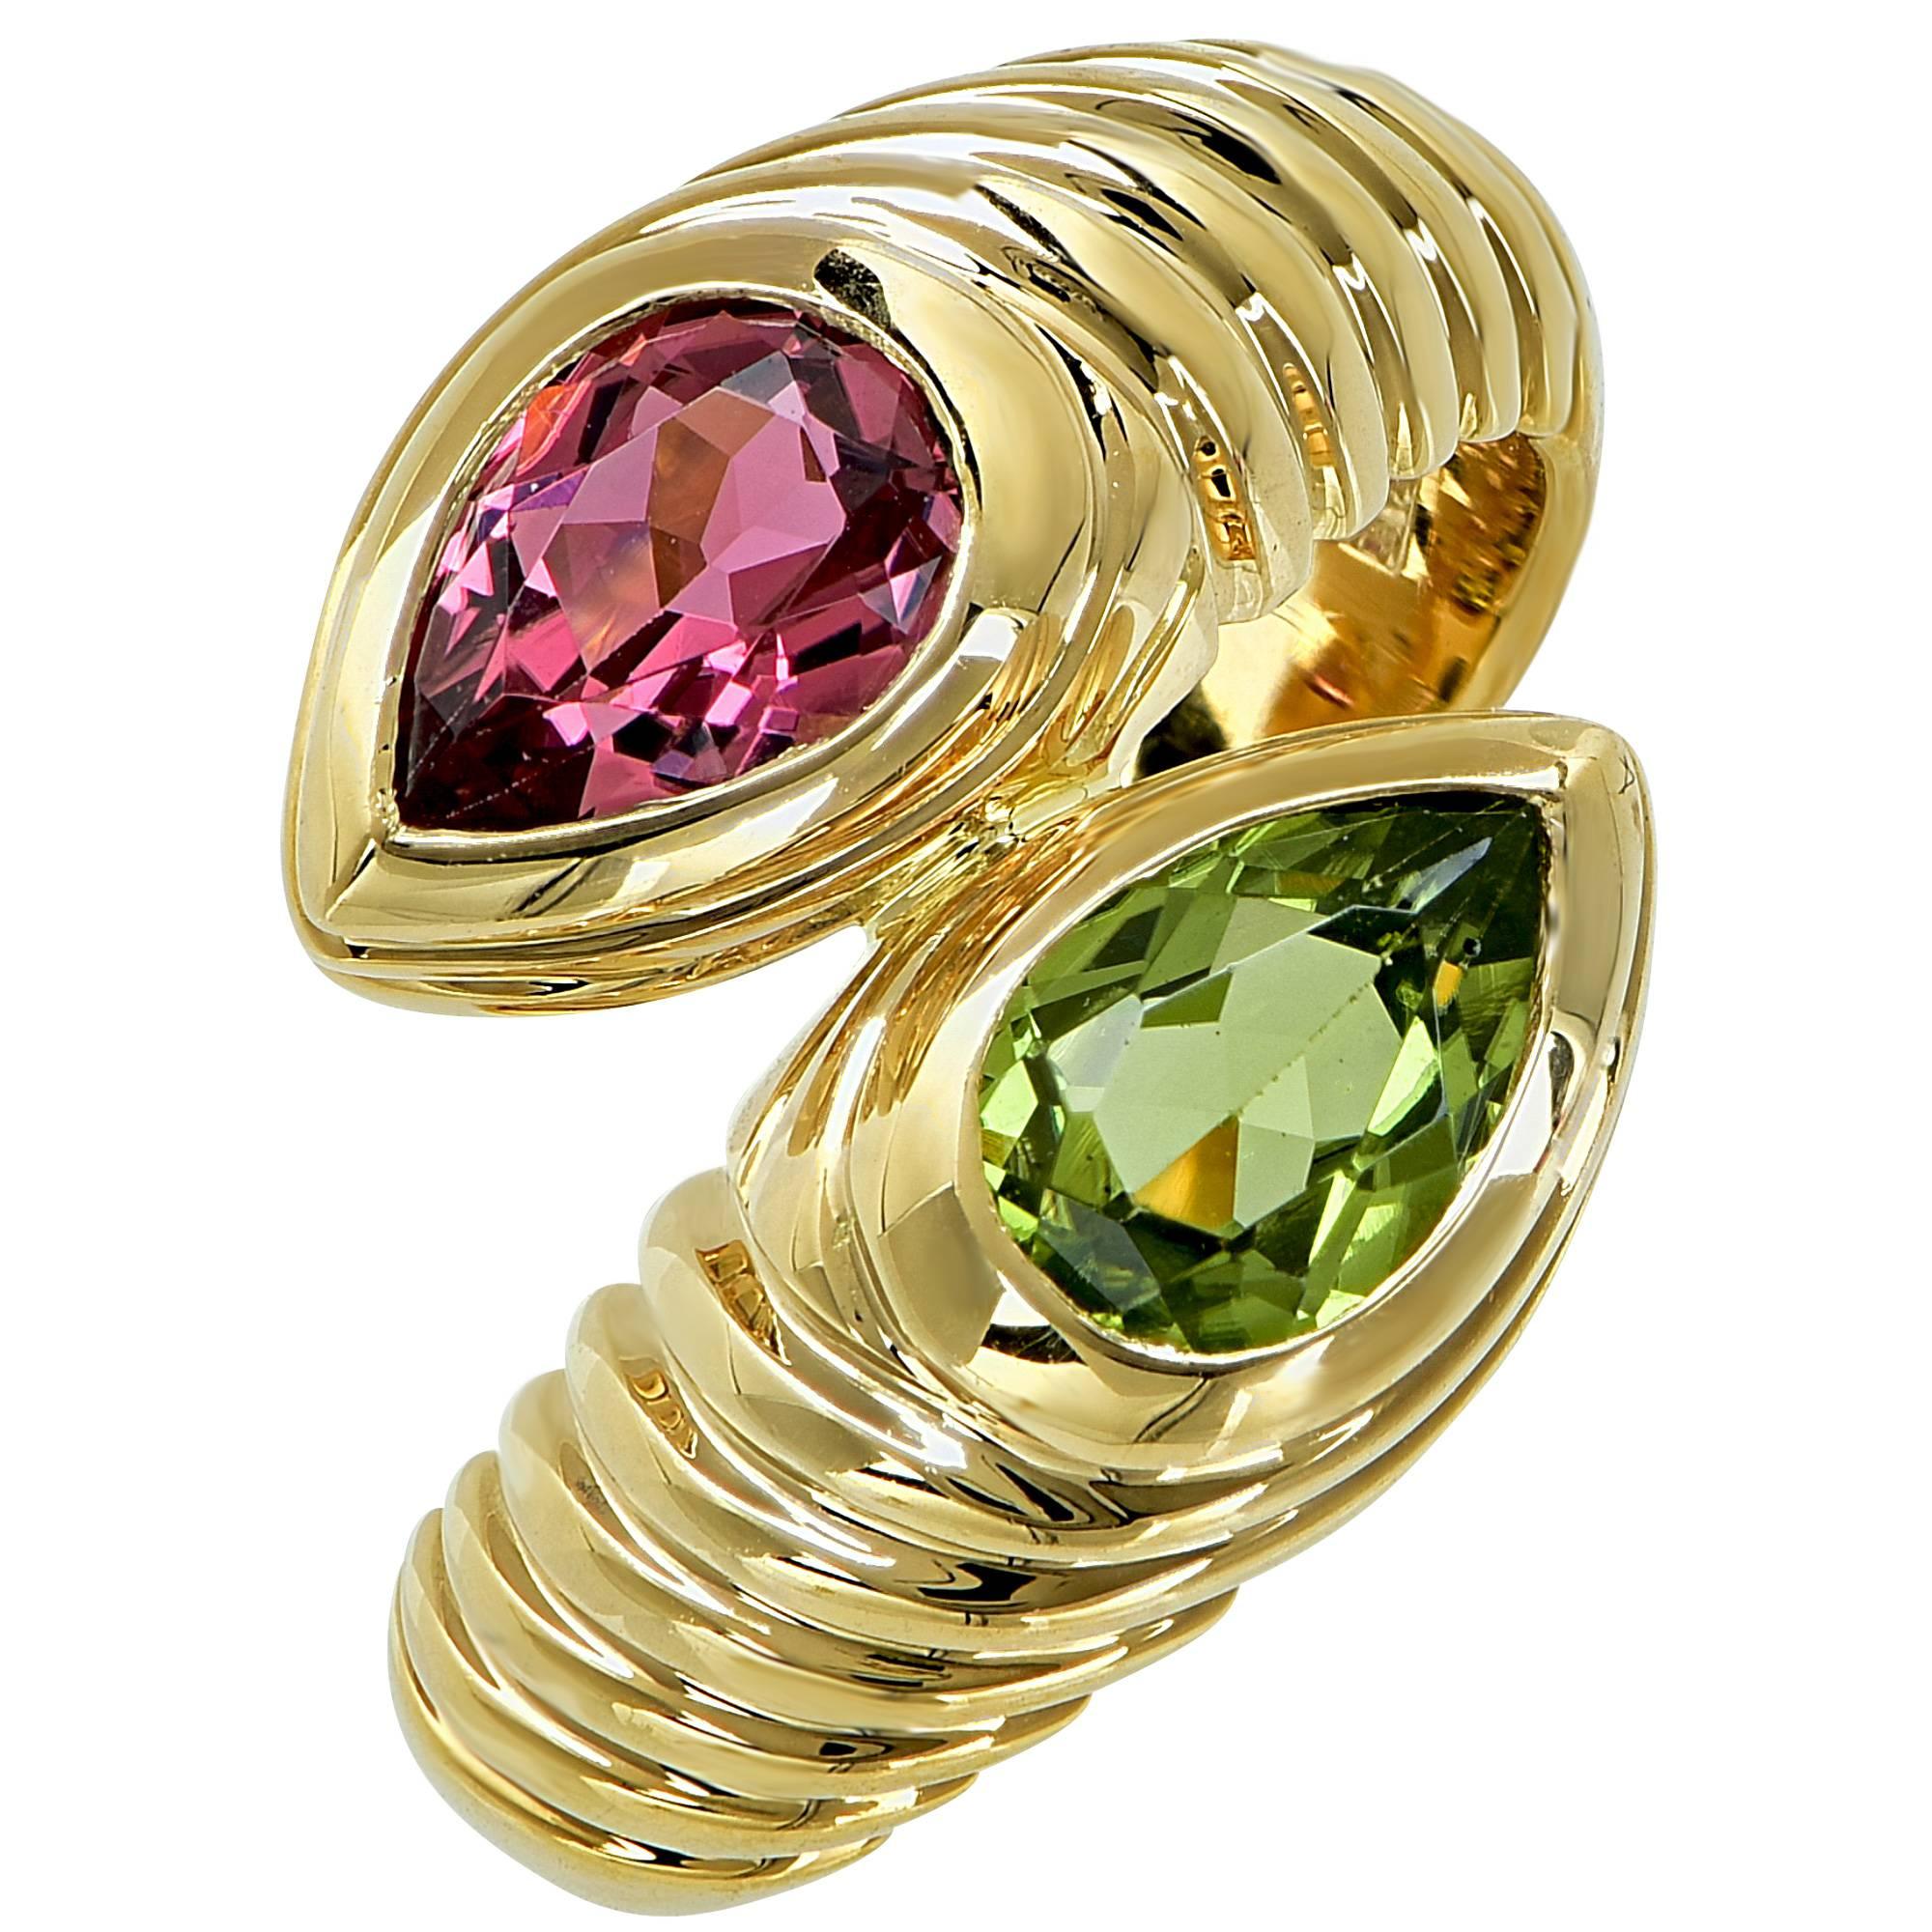 Authentic Bulgari Doppio 18k gold ring featuring a pear shaped pink tourmaline and a pear shaped peridot.

The ring is a size 5.5 and can be sized.
It is stamped and tested as 18k gold.
The metal weight is 10.57 grams.

This Bulgari ring is